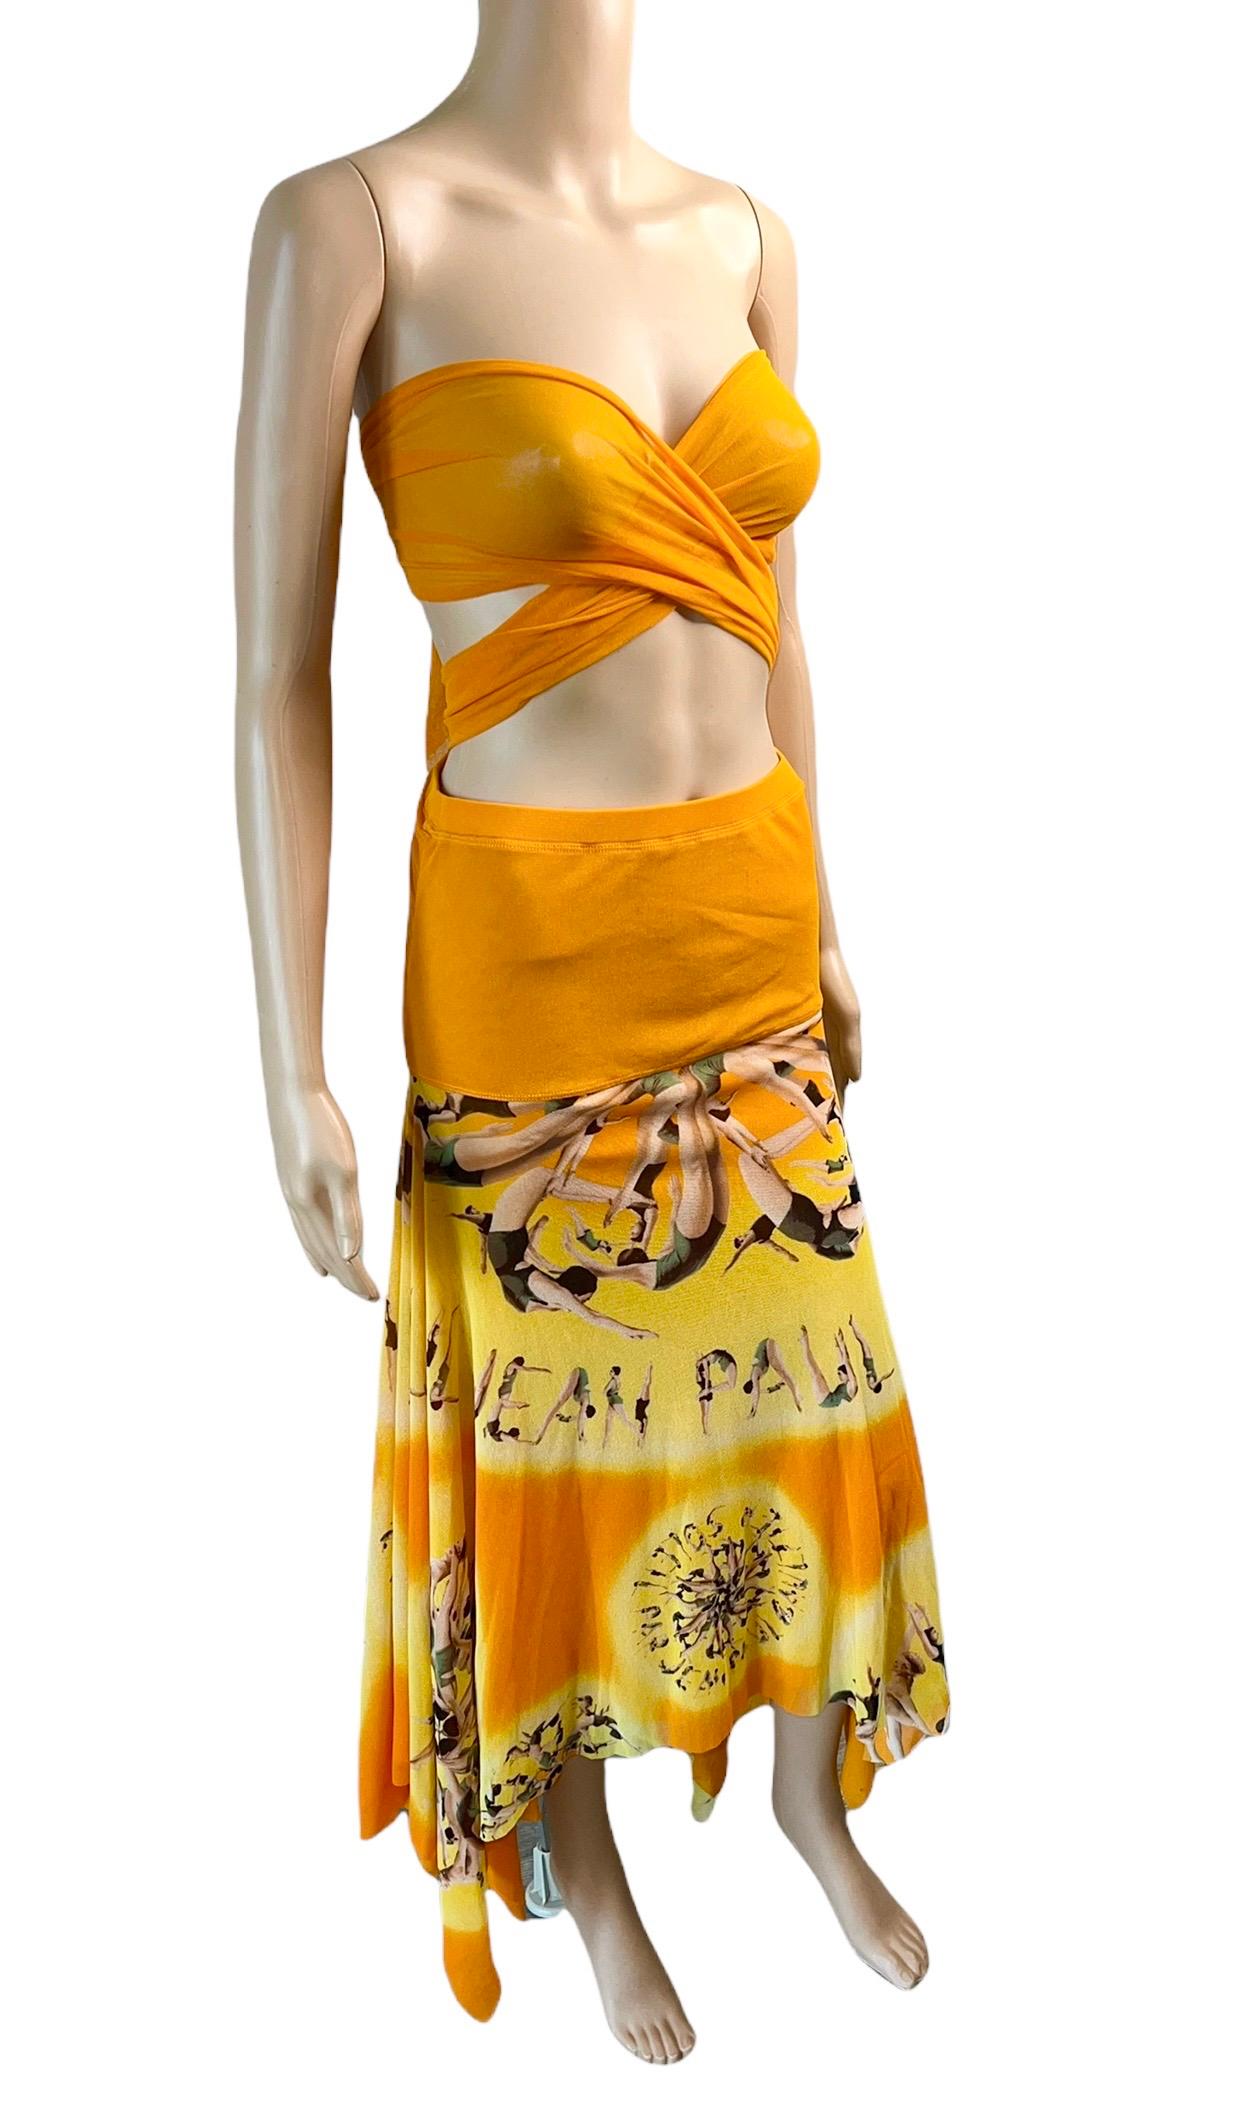 Jean Paul Gaultier Soleil Logo People Print Semi-Sheer Mesh Maxi Skirt Dress Size M

Please note this piece is very versatile and it could be styled as a strapless dress or a maxi skirt based on preference.